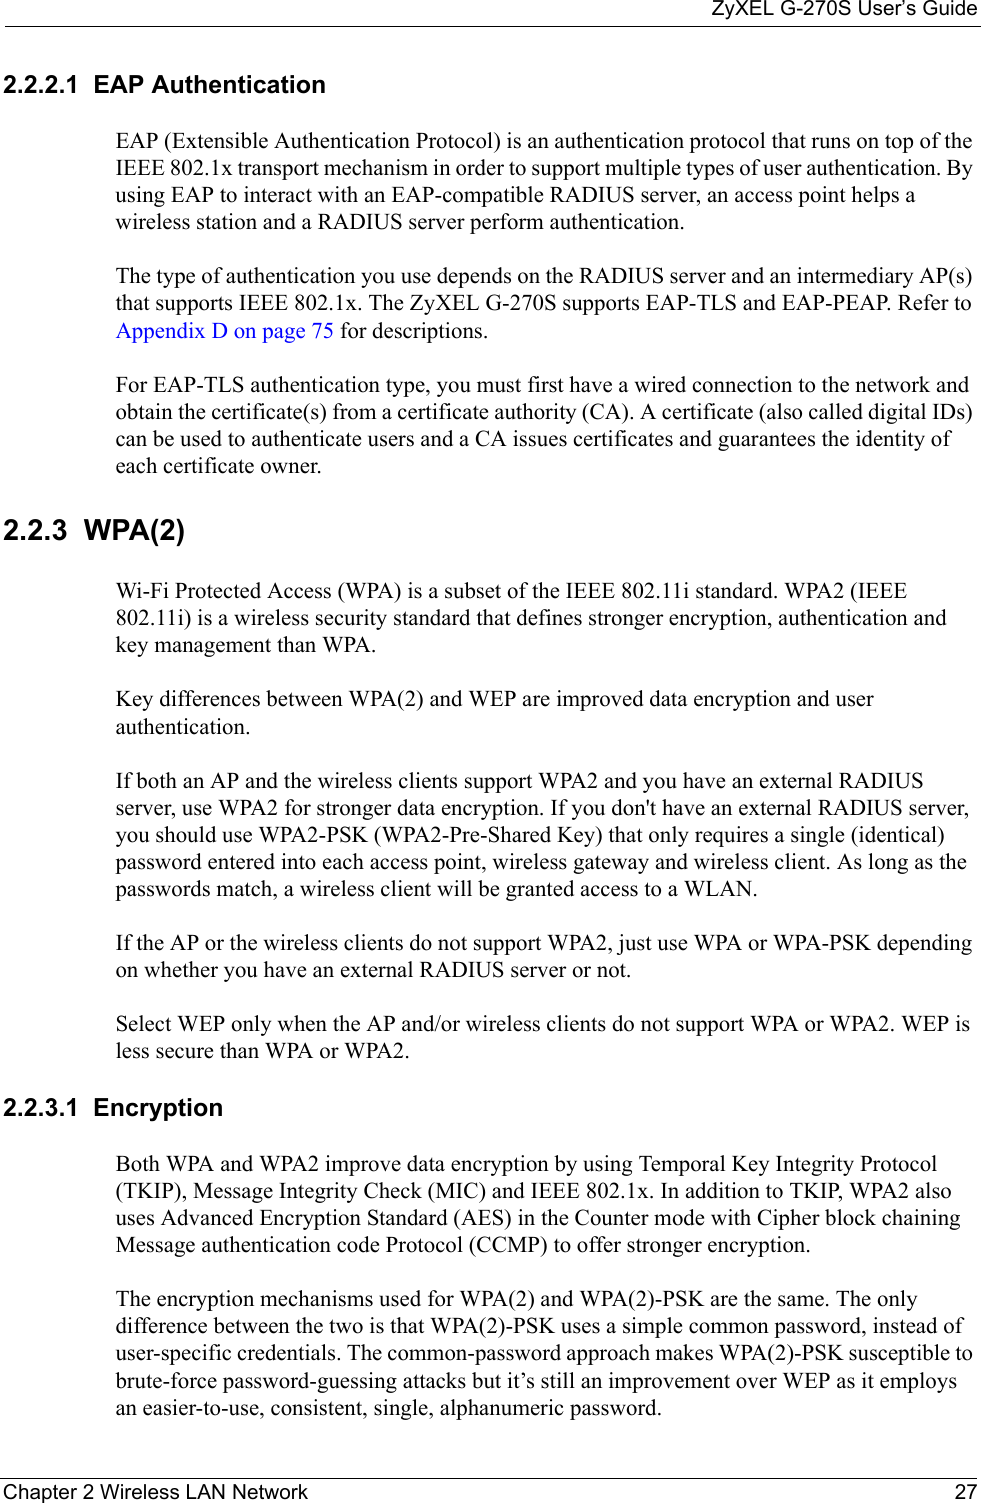 ZyXEL G-270S User’s GuideChapter 2 Wireless LAN Network 272.2.2.1  EAP Authentication EAP (Extensible Authentication Protocol) is an authentication protocol that runs on top of the IEEE 802.1x transport mechanism in order to support multiple types of user authentication. By using EAP to interact with an EAP-compatible RADIUS server, an access point helps a wireless station and a RADIUS server perform authentication. The type of authentication you use depends on the RADIUS server and an intermediary AP(s) that supports IEEE 802.1x. The ZyXEL G-270S supports EAP-TLS and EAP-PEAP. Refer to Appendix D on page 75 for descriptions.For EAP-TLS authentication type, you must first have a wired connection to the network and obtain the certificate(s) from a certificate authority (CA). A certificate (also called digital IDs) can be used to authenticate users and a CA issues certificates and guarantees the identity of each certificate owner.2.2.3  WPA(2)Wi-Fi Protected Access (WPA) is a subset of the IEEE 802.11i standard. WPA2 (IEEE 802.11i) is a wireless security standard that defines stronger encryption, authentication and key management than WPA. Key differences between WPA(2) and WEP are improved data encryption and user authentication.If both an AP and the wireless clients support WPA2 and you have an external RADIUS server, use WPA2 for stronger data encryption. If you don&apos;t have an external RADIUS server, you should use WPA2-PSK (WPA2-Pre-Shared Key) that only requires a single (identical) password entered into each access point, wireless gateway and wireless client. As long as the passwords match, a wireless client will be granted access to a WLAN. If the AP or the wireless clients do not support WPA2, just use WPA or WPA-PSK depending on whether you have an external RADIUS server or not.Select WEP only when the AP and/or wireless clients do not support WPA or WPA2. WEP is less secure than WPA or WPA2.2.2.3.1  Encryption Both WPA and WPA2 improve data encryption by using Temporal Key Integrity Protocol (TKIP), Message Integrity Check (MIC) and IEEE 802.1x. In addition to TKIP, WPA2 also uses Advanced Encryption Standard (AES) in the Counter mode with Cipher block chaining Message authentication code Protocol (CCMP) to offer stronger encryption.The encryption mechanisms used for WPA(2) and WPA(2)-PSK are the same. The only difference between the two is that WPA(2)-PSK uses a simple common password, instead of user-specific credentials. The common-password approach makes WPA(2)-PSK susceptible to brute-force password-guessing attacks but it’s still an improvement over WEP as it employs an easier-to-use, consistent, single, alphanumeric password.